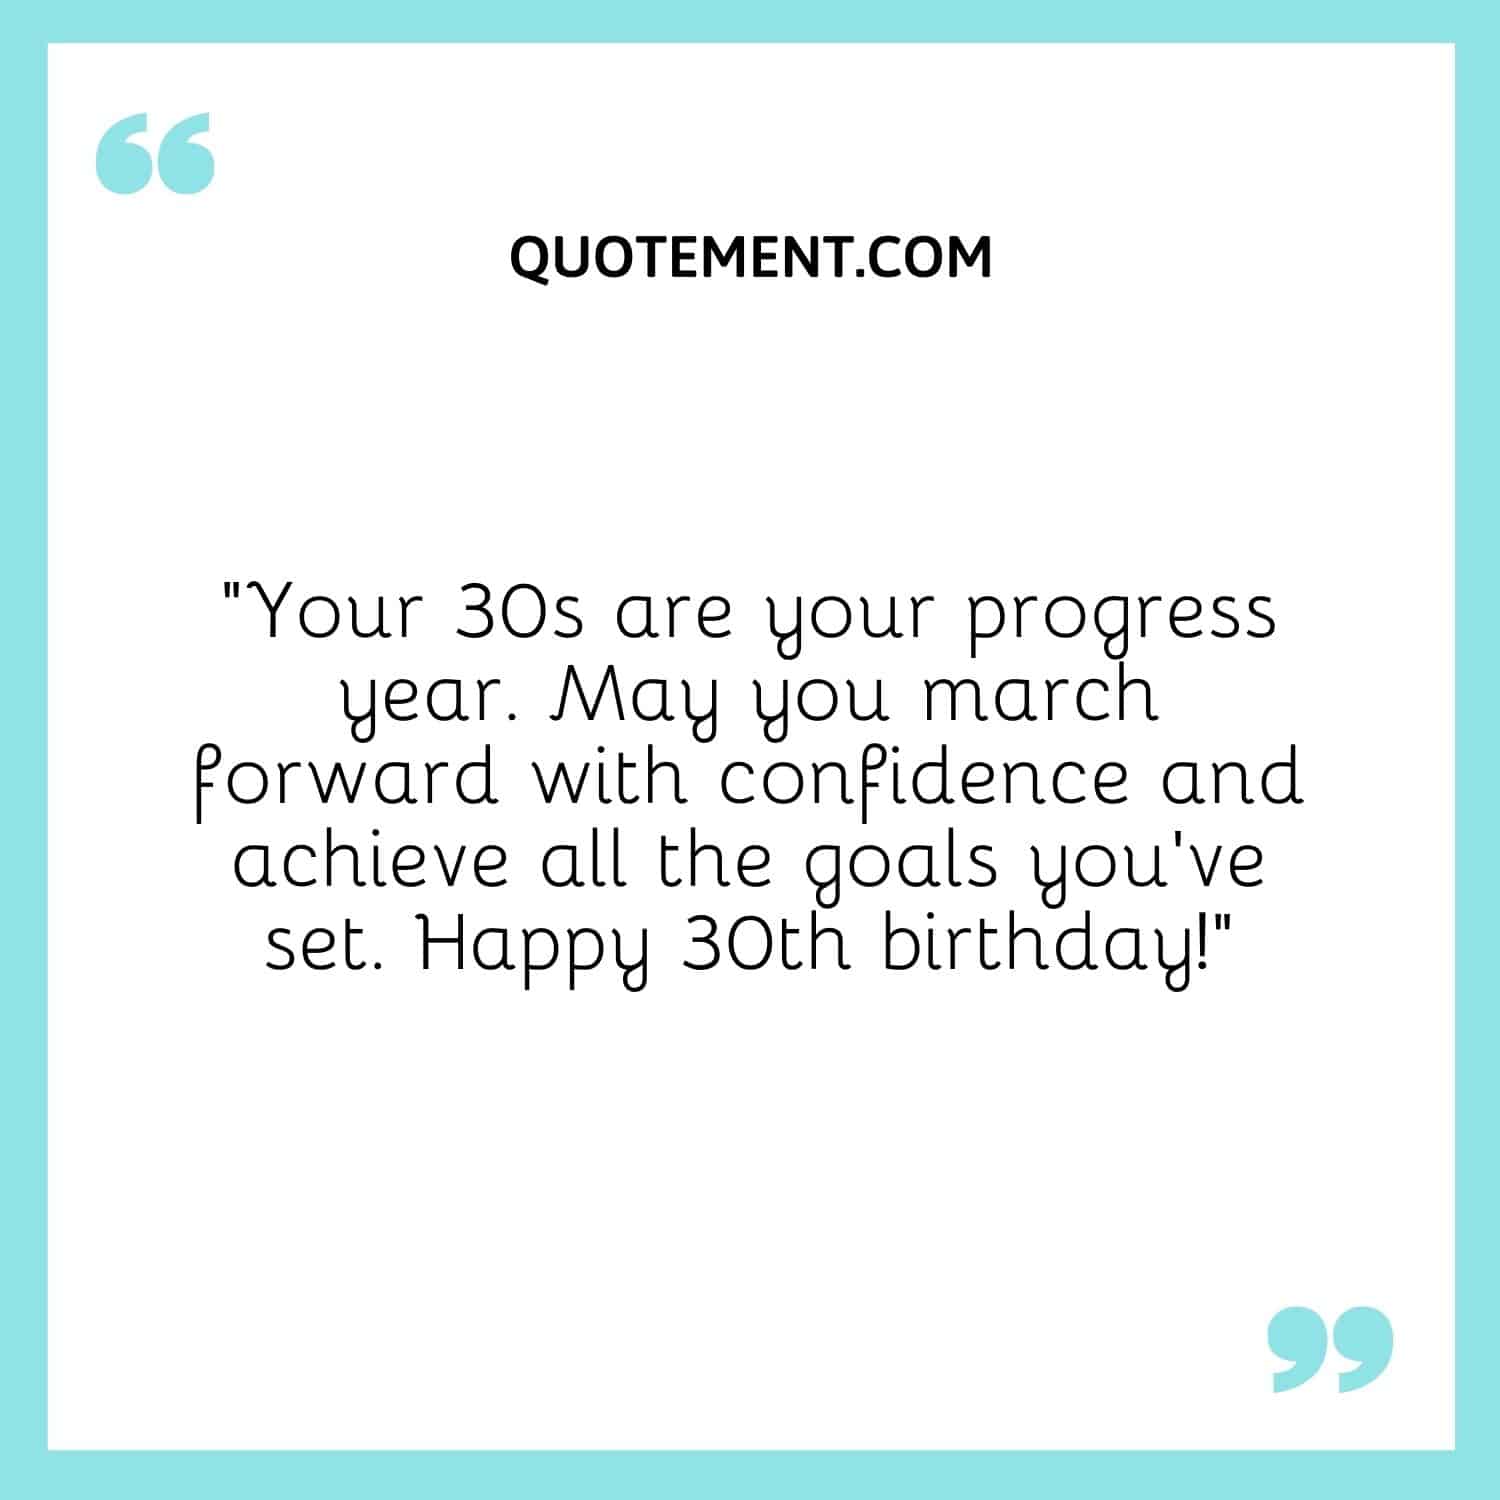 “Your 30s are your progress year. May you march forward with confidence and achieve all the goals you’ve set. Happy 30th birthday!”